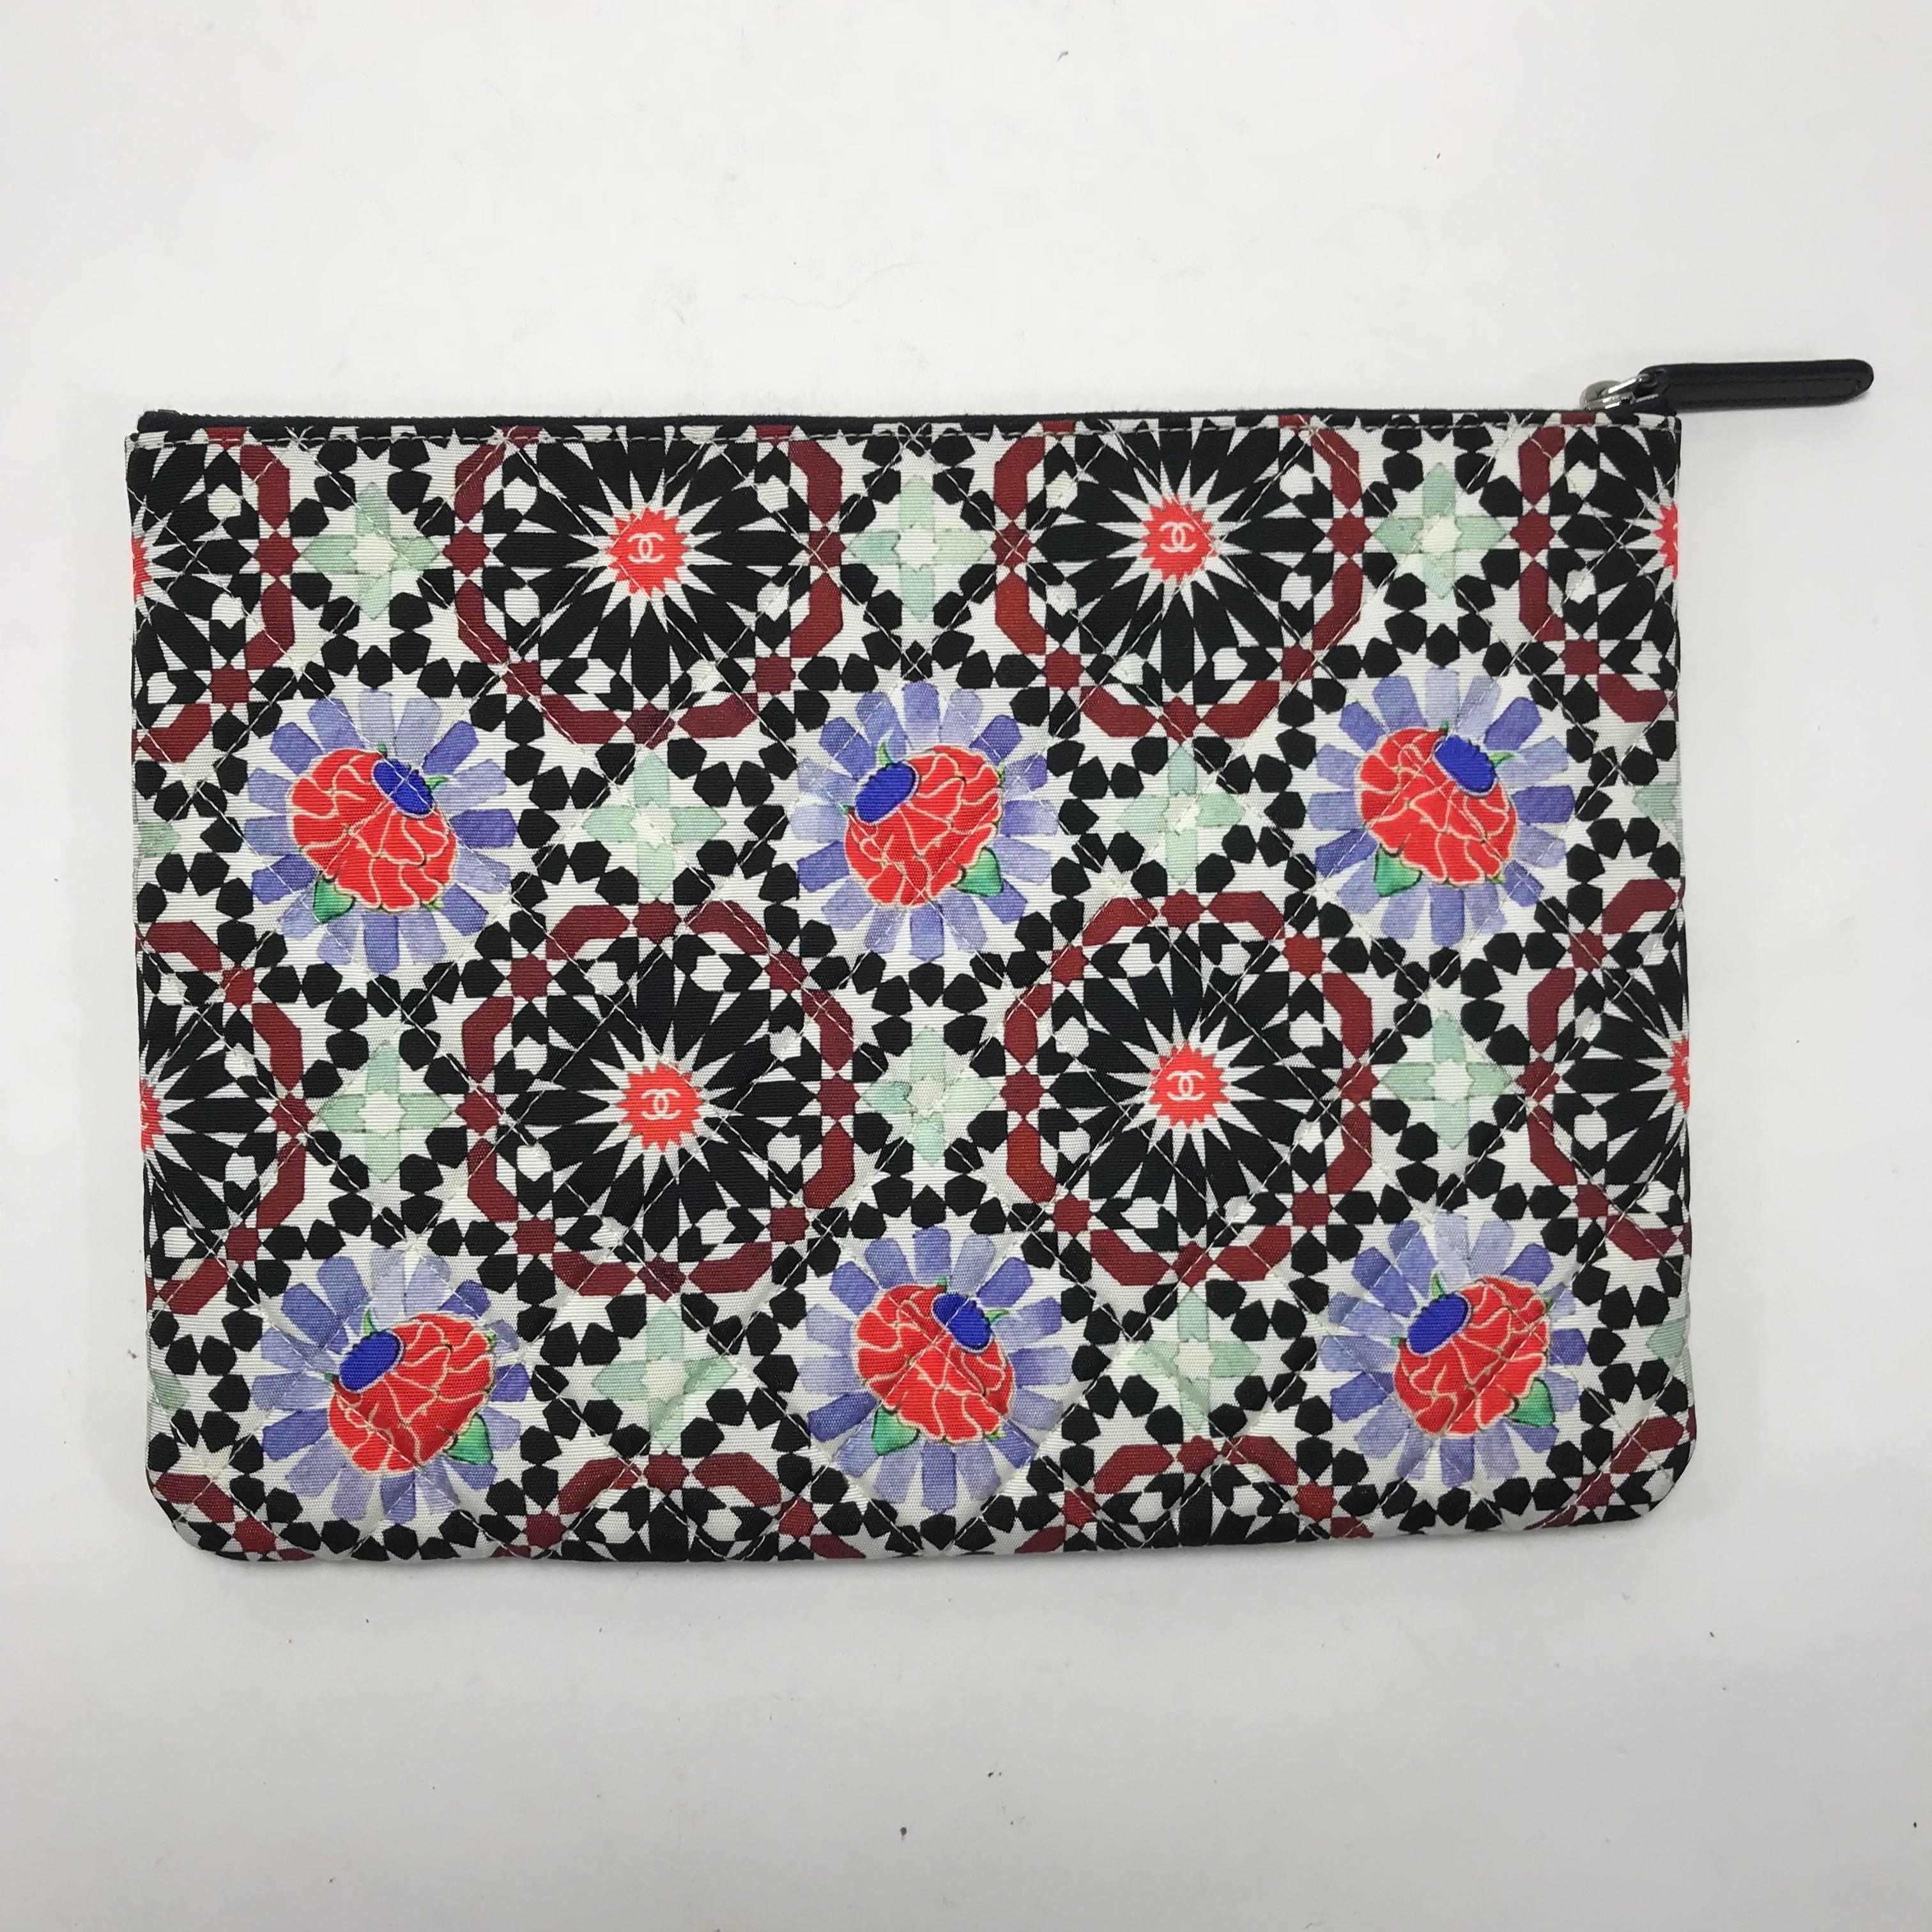 Chanel Dubai O Clutch Kaleidoscope Floral and Diamond Pattern In New Condition For Sale In Saint Charles, IL